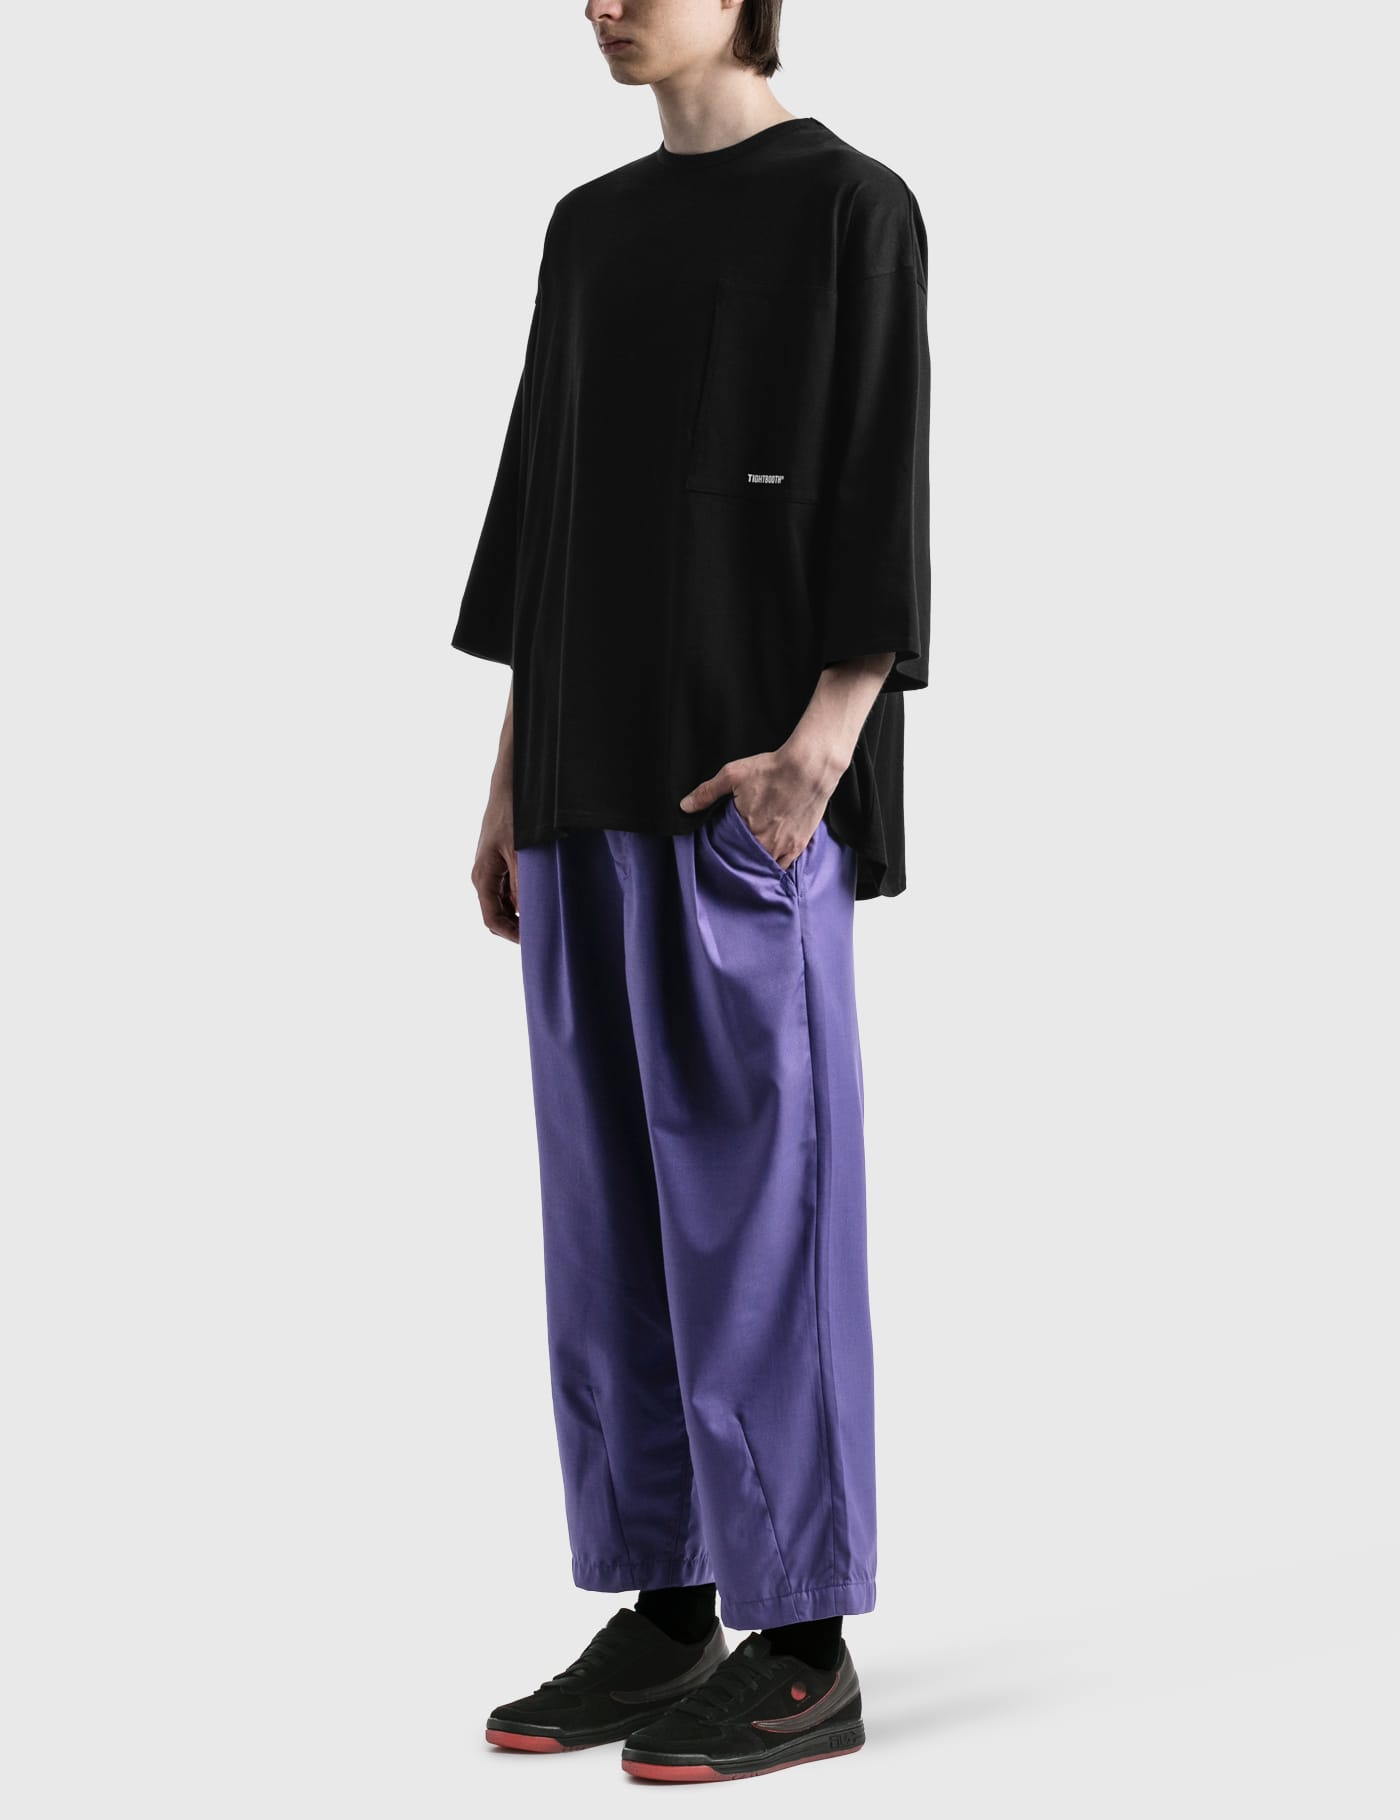 TIGHTBOOTH - Baggy Slacks | HBX - Globally Curated Fashion and 